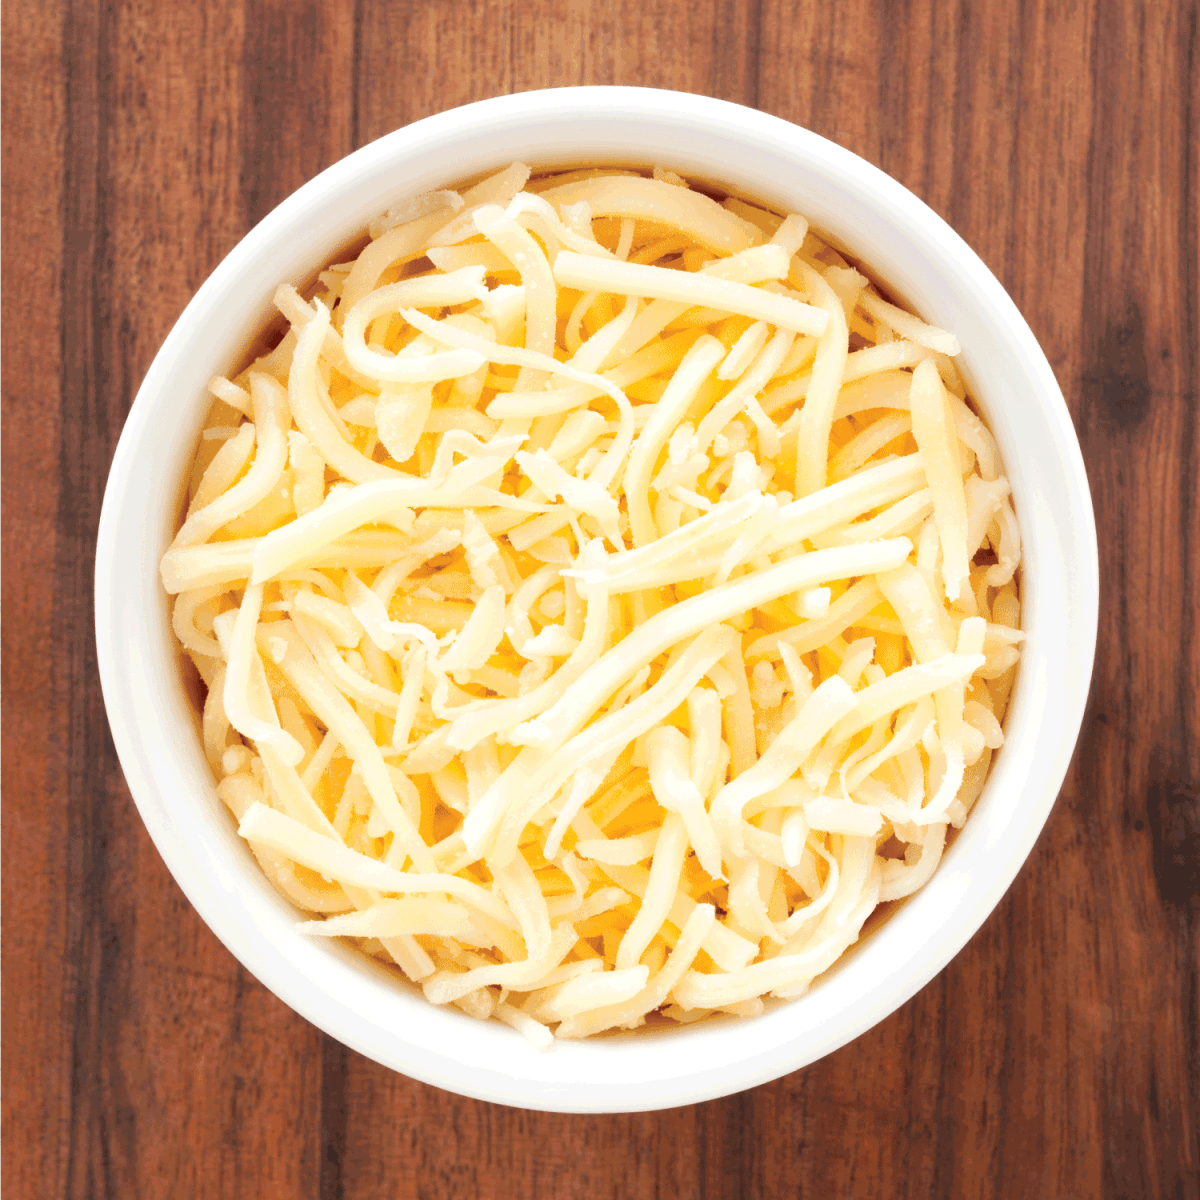 Top view of white bowl full of grated cheese